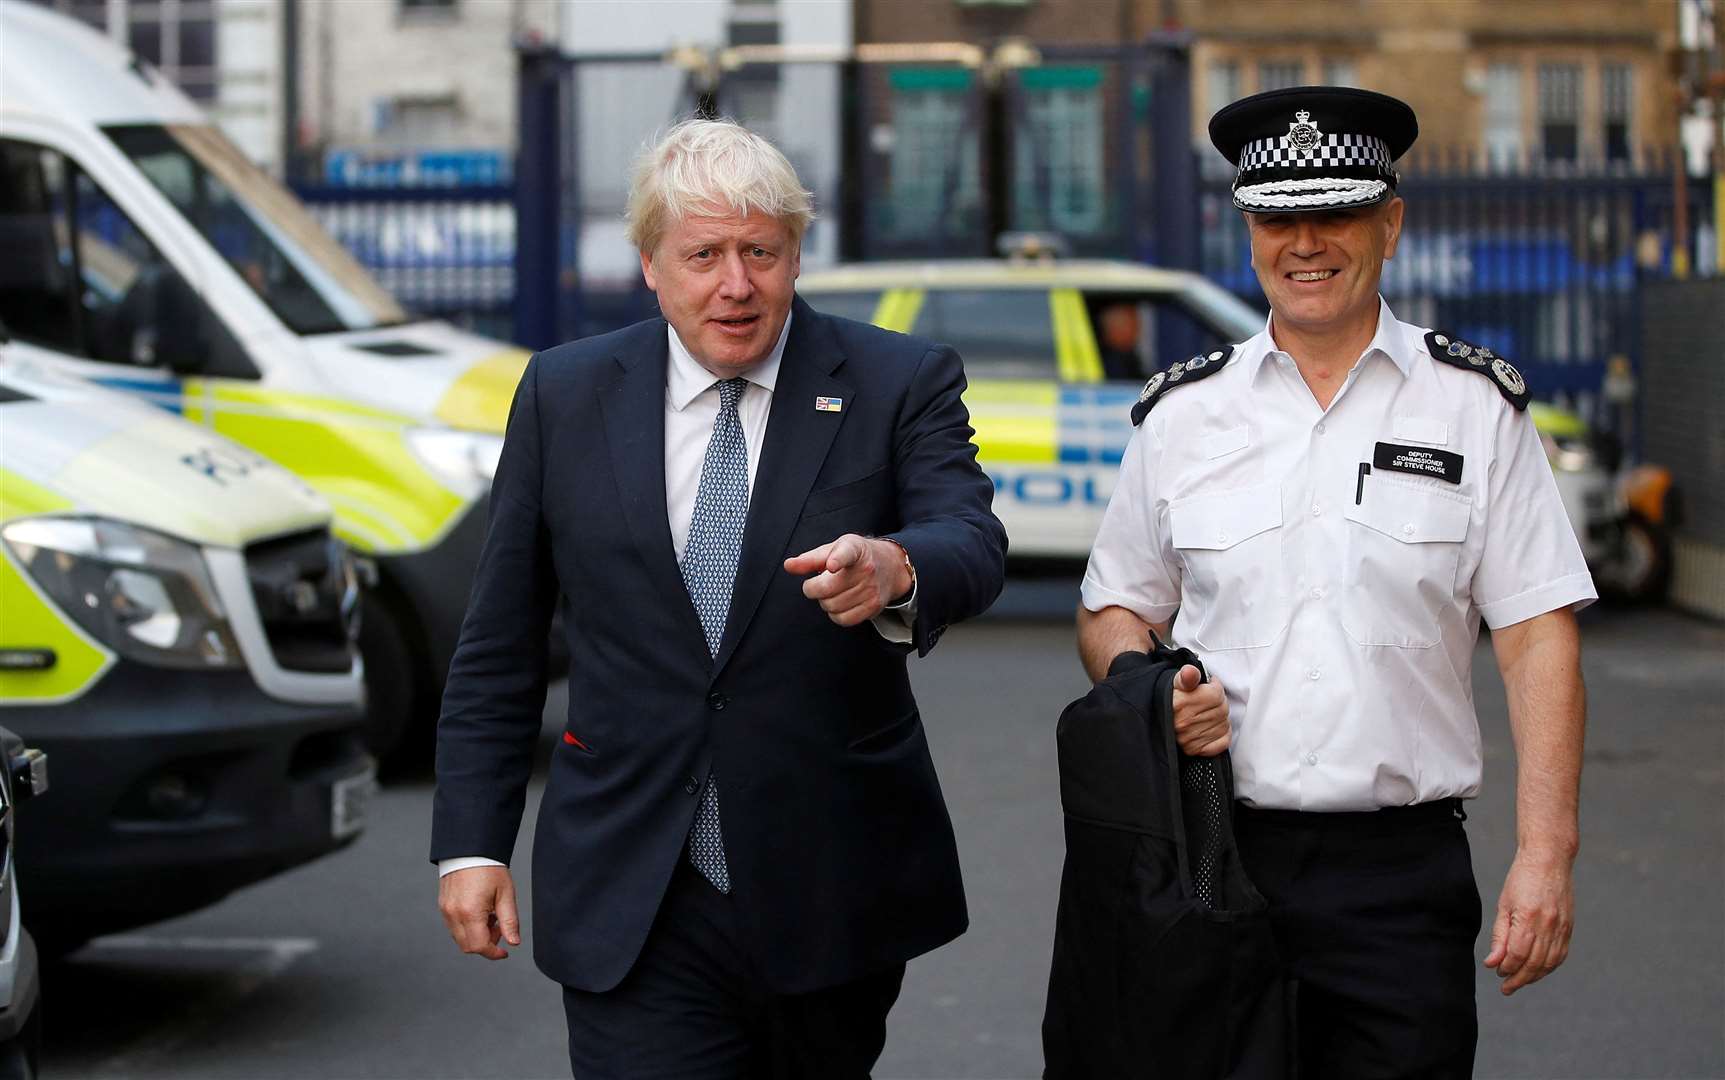 Sir Stephen House visited a police station in south-east London with then prime minister Boris Johnson in August 2022 (PA)